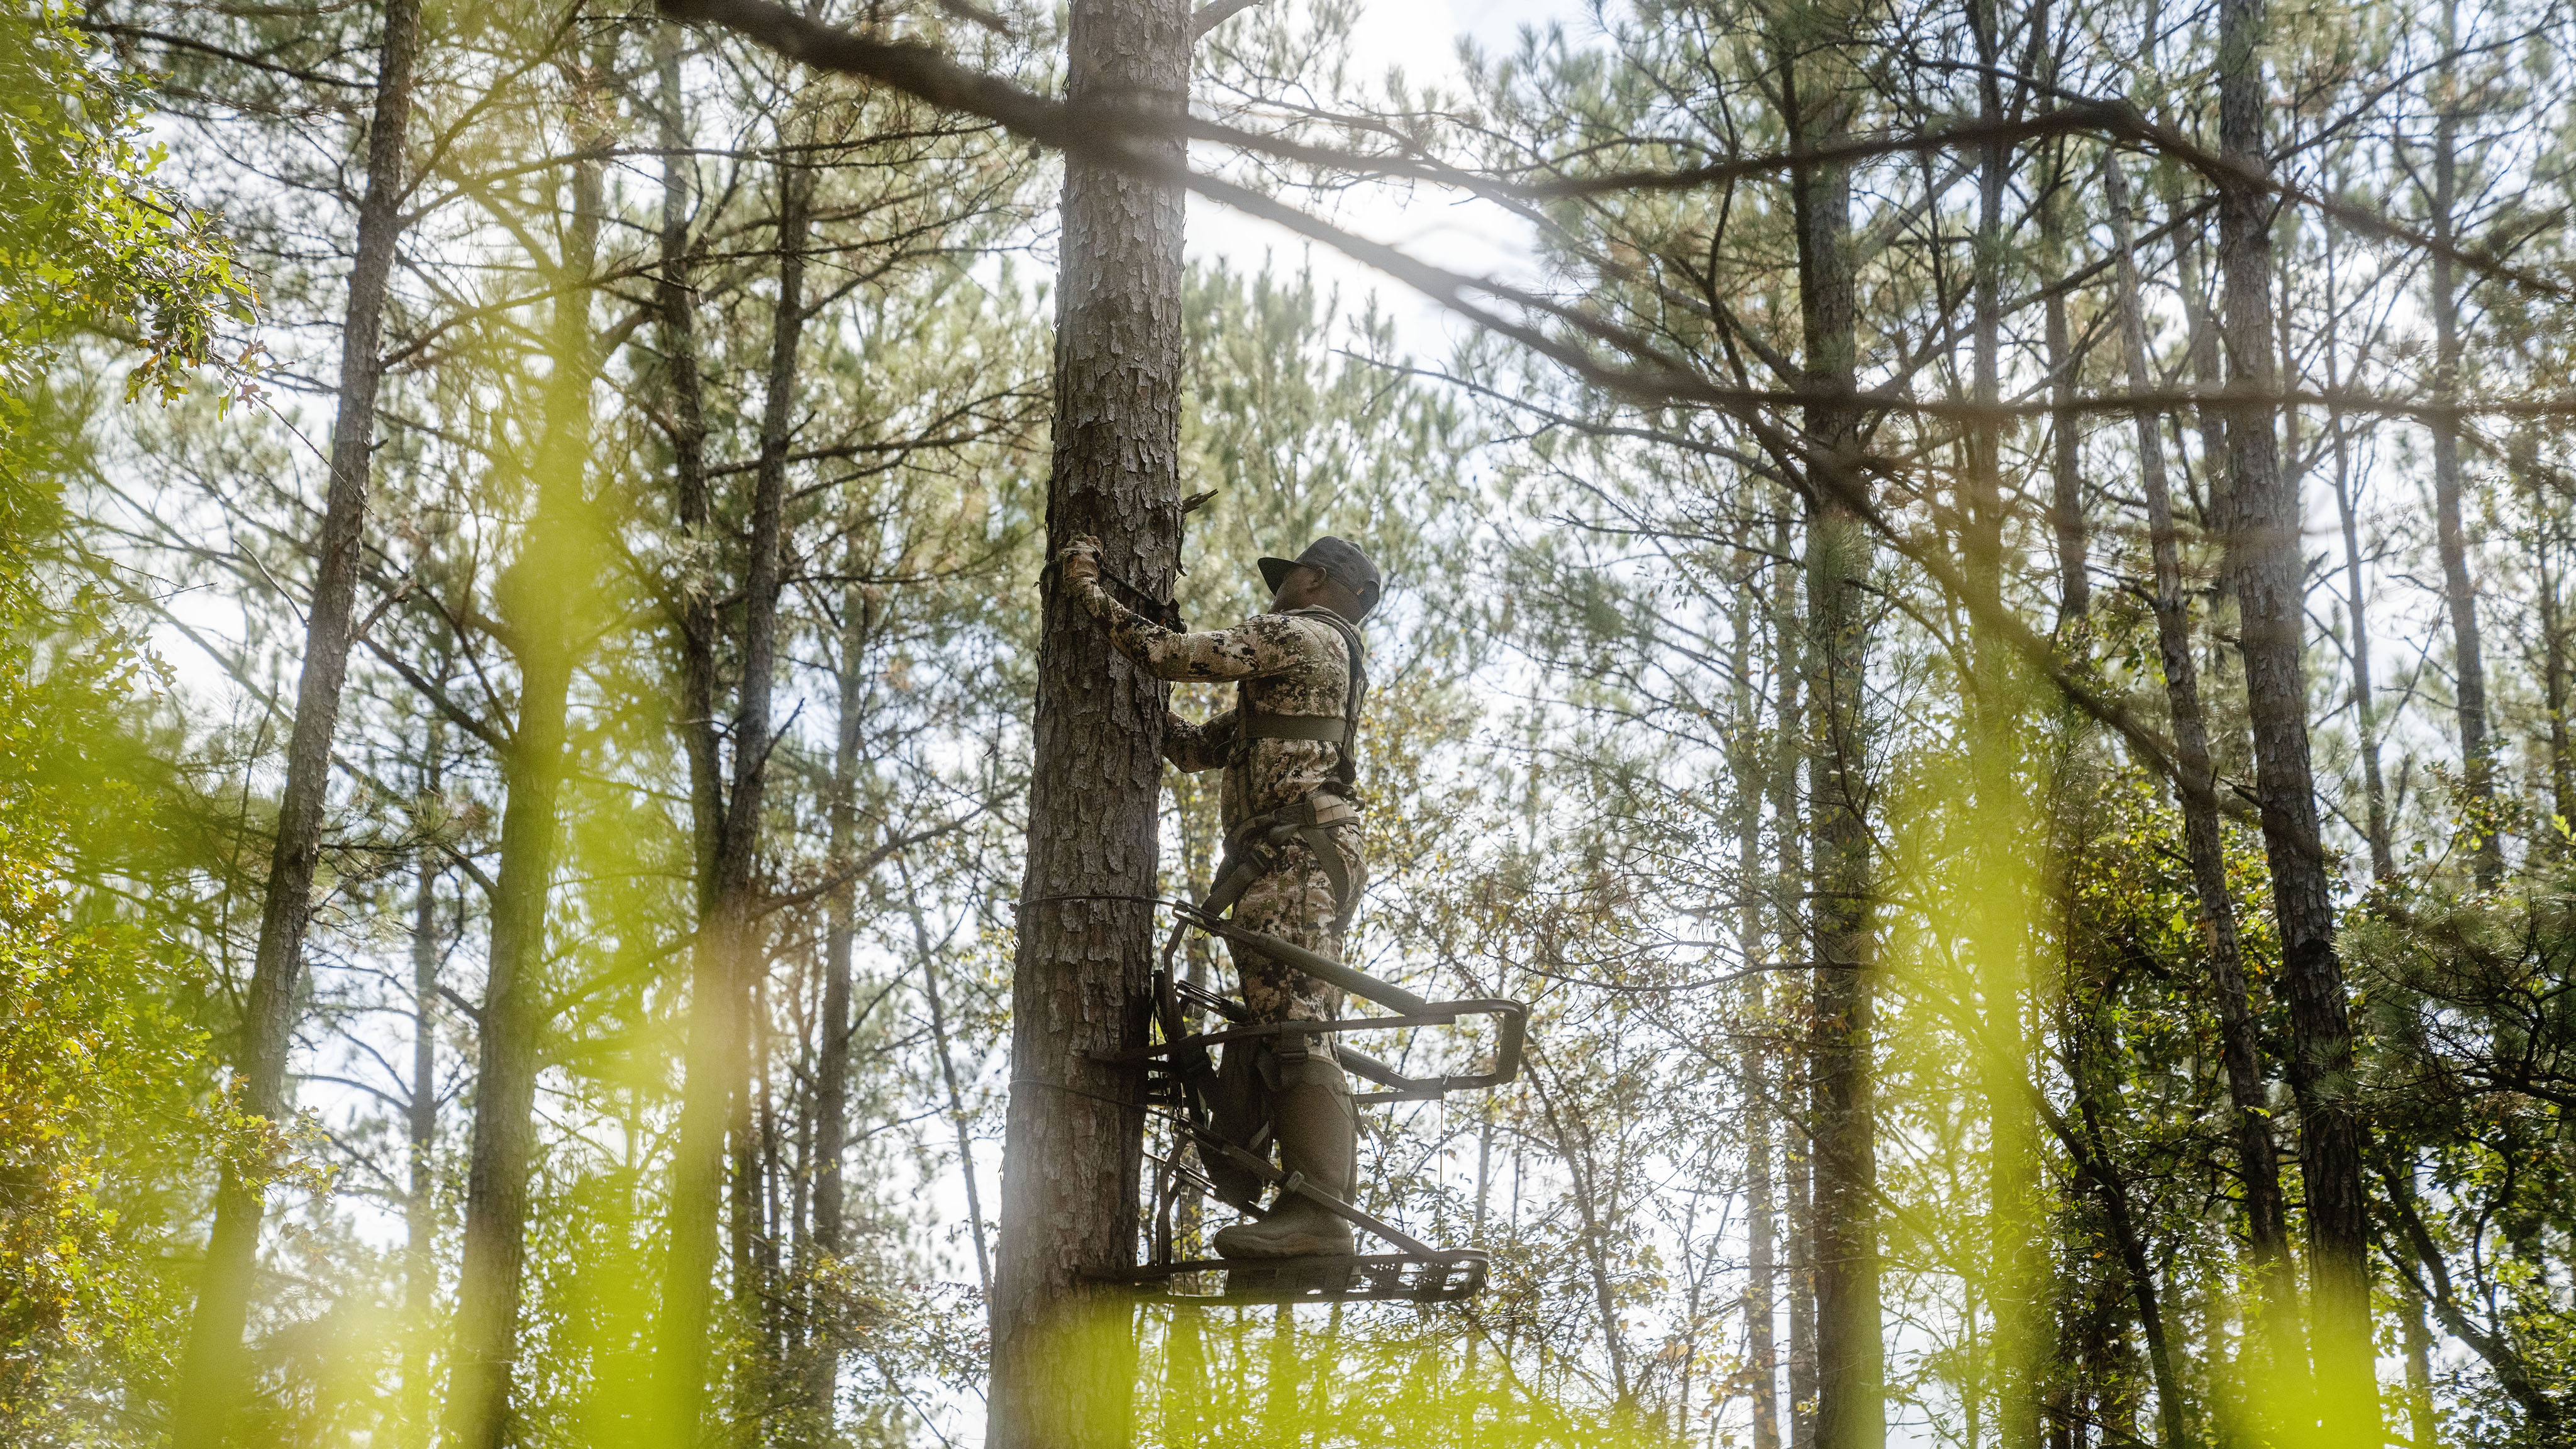 A hunter in a tree installing his tree stand as the sun peers through the forest